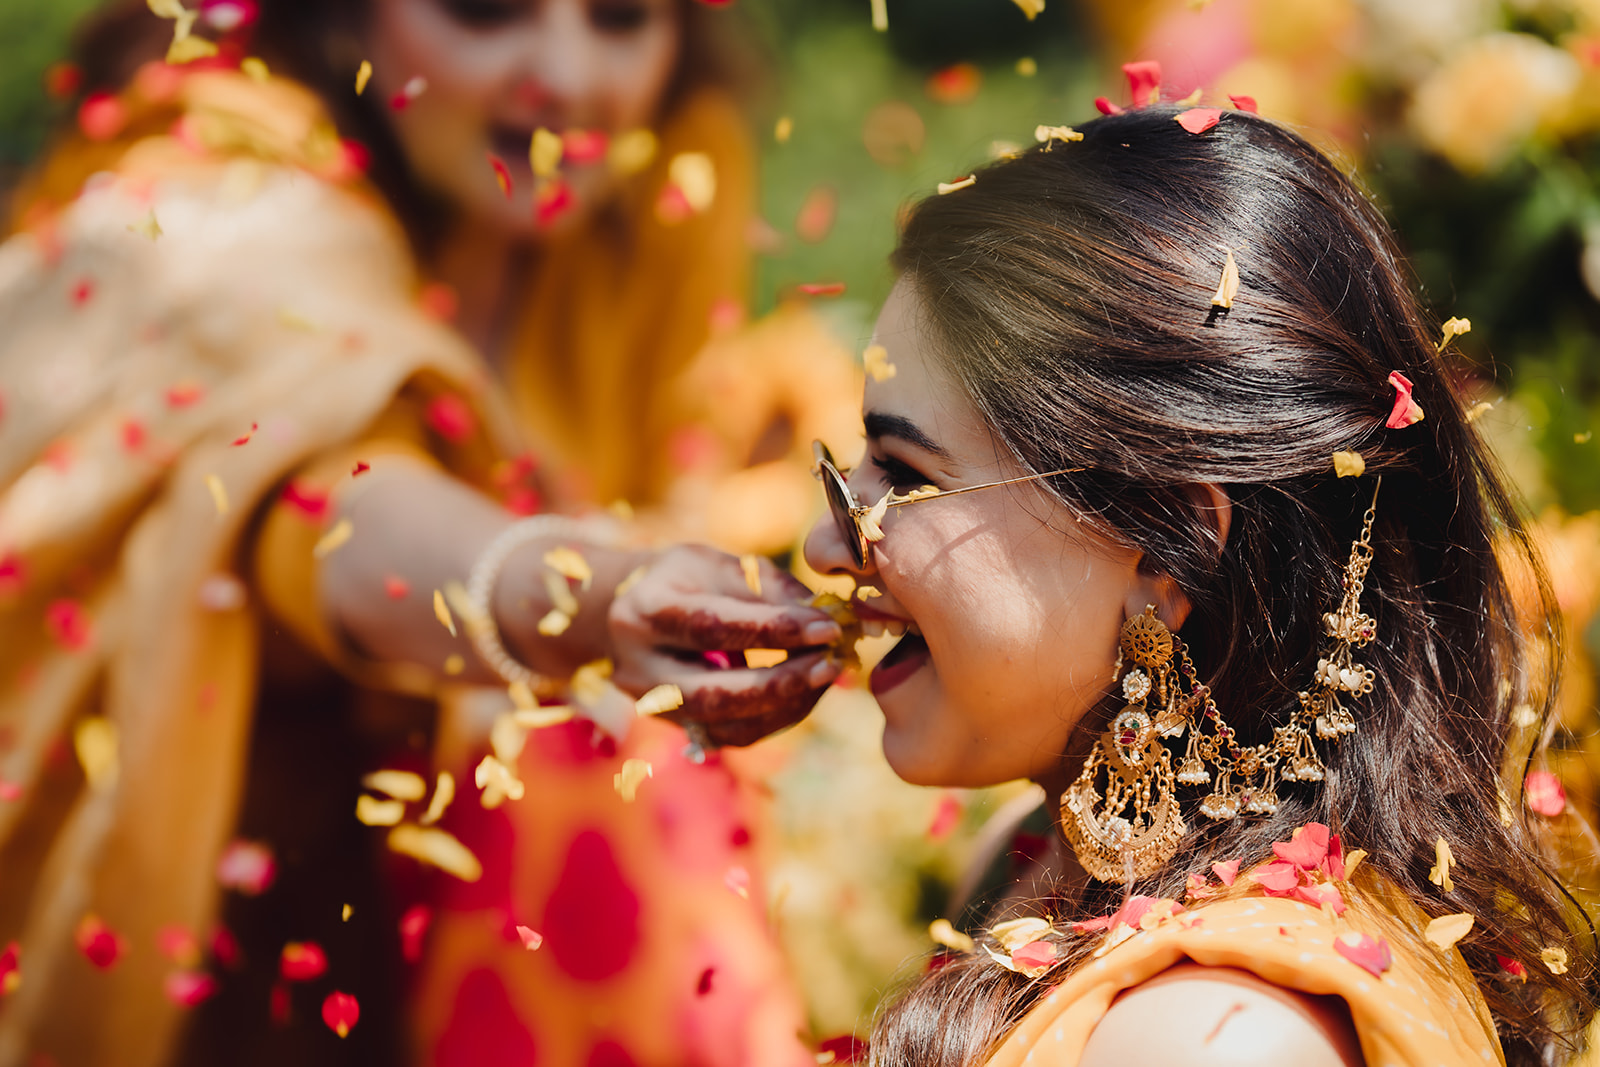 Celebrating in style: Bride wearing gorgeous jewelry for her haldi ceremony